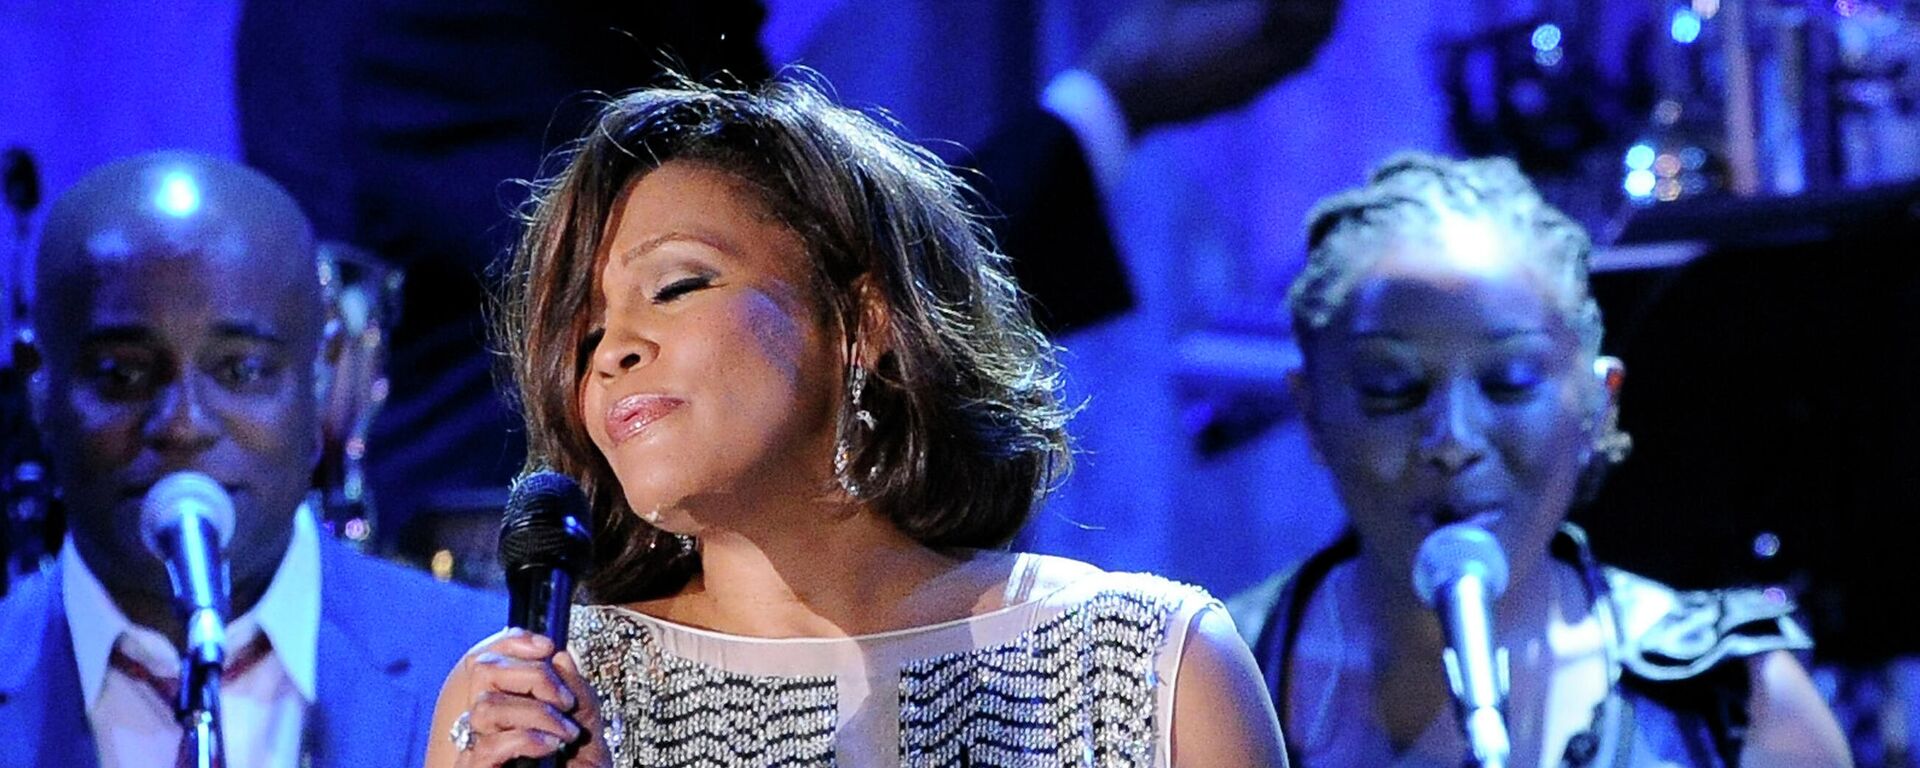 In this Feb. 13, 2011 file photo, singer Whitney Houston performs at the pre-Grammy gala & salute to industry icons with Clive Davis honoring David Geffen in Beverly Hills, Calif. - Sputnik International, 1920, 18.11.2021